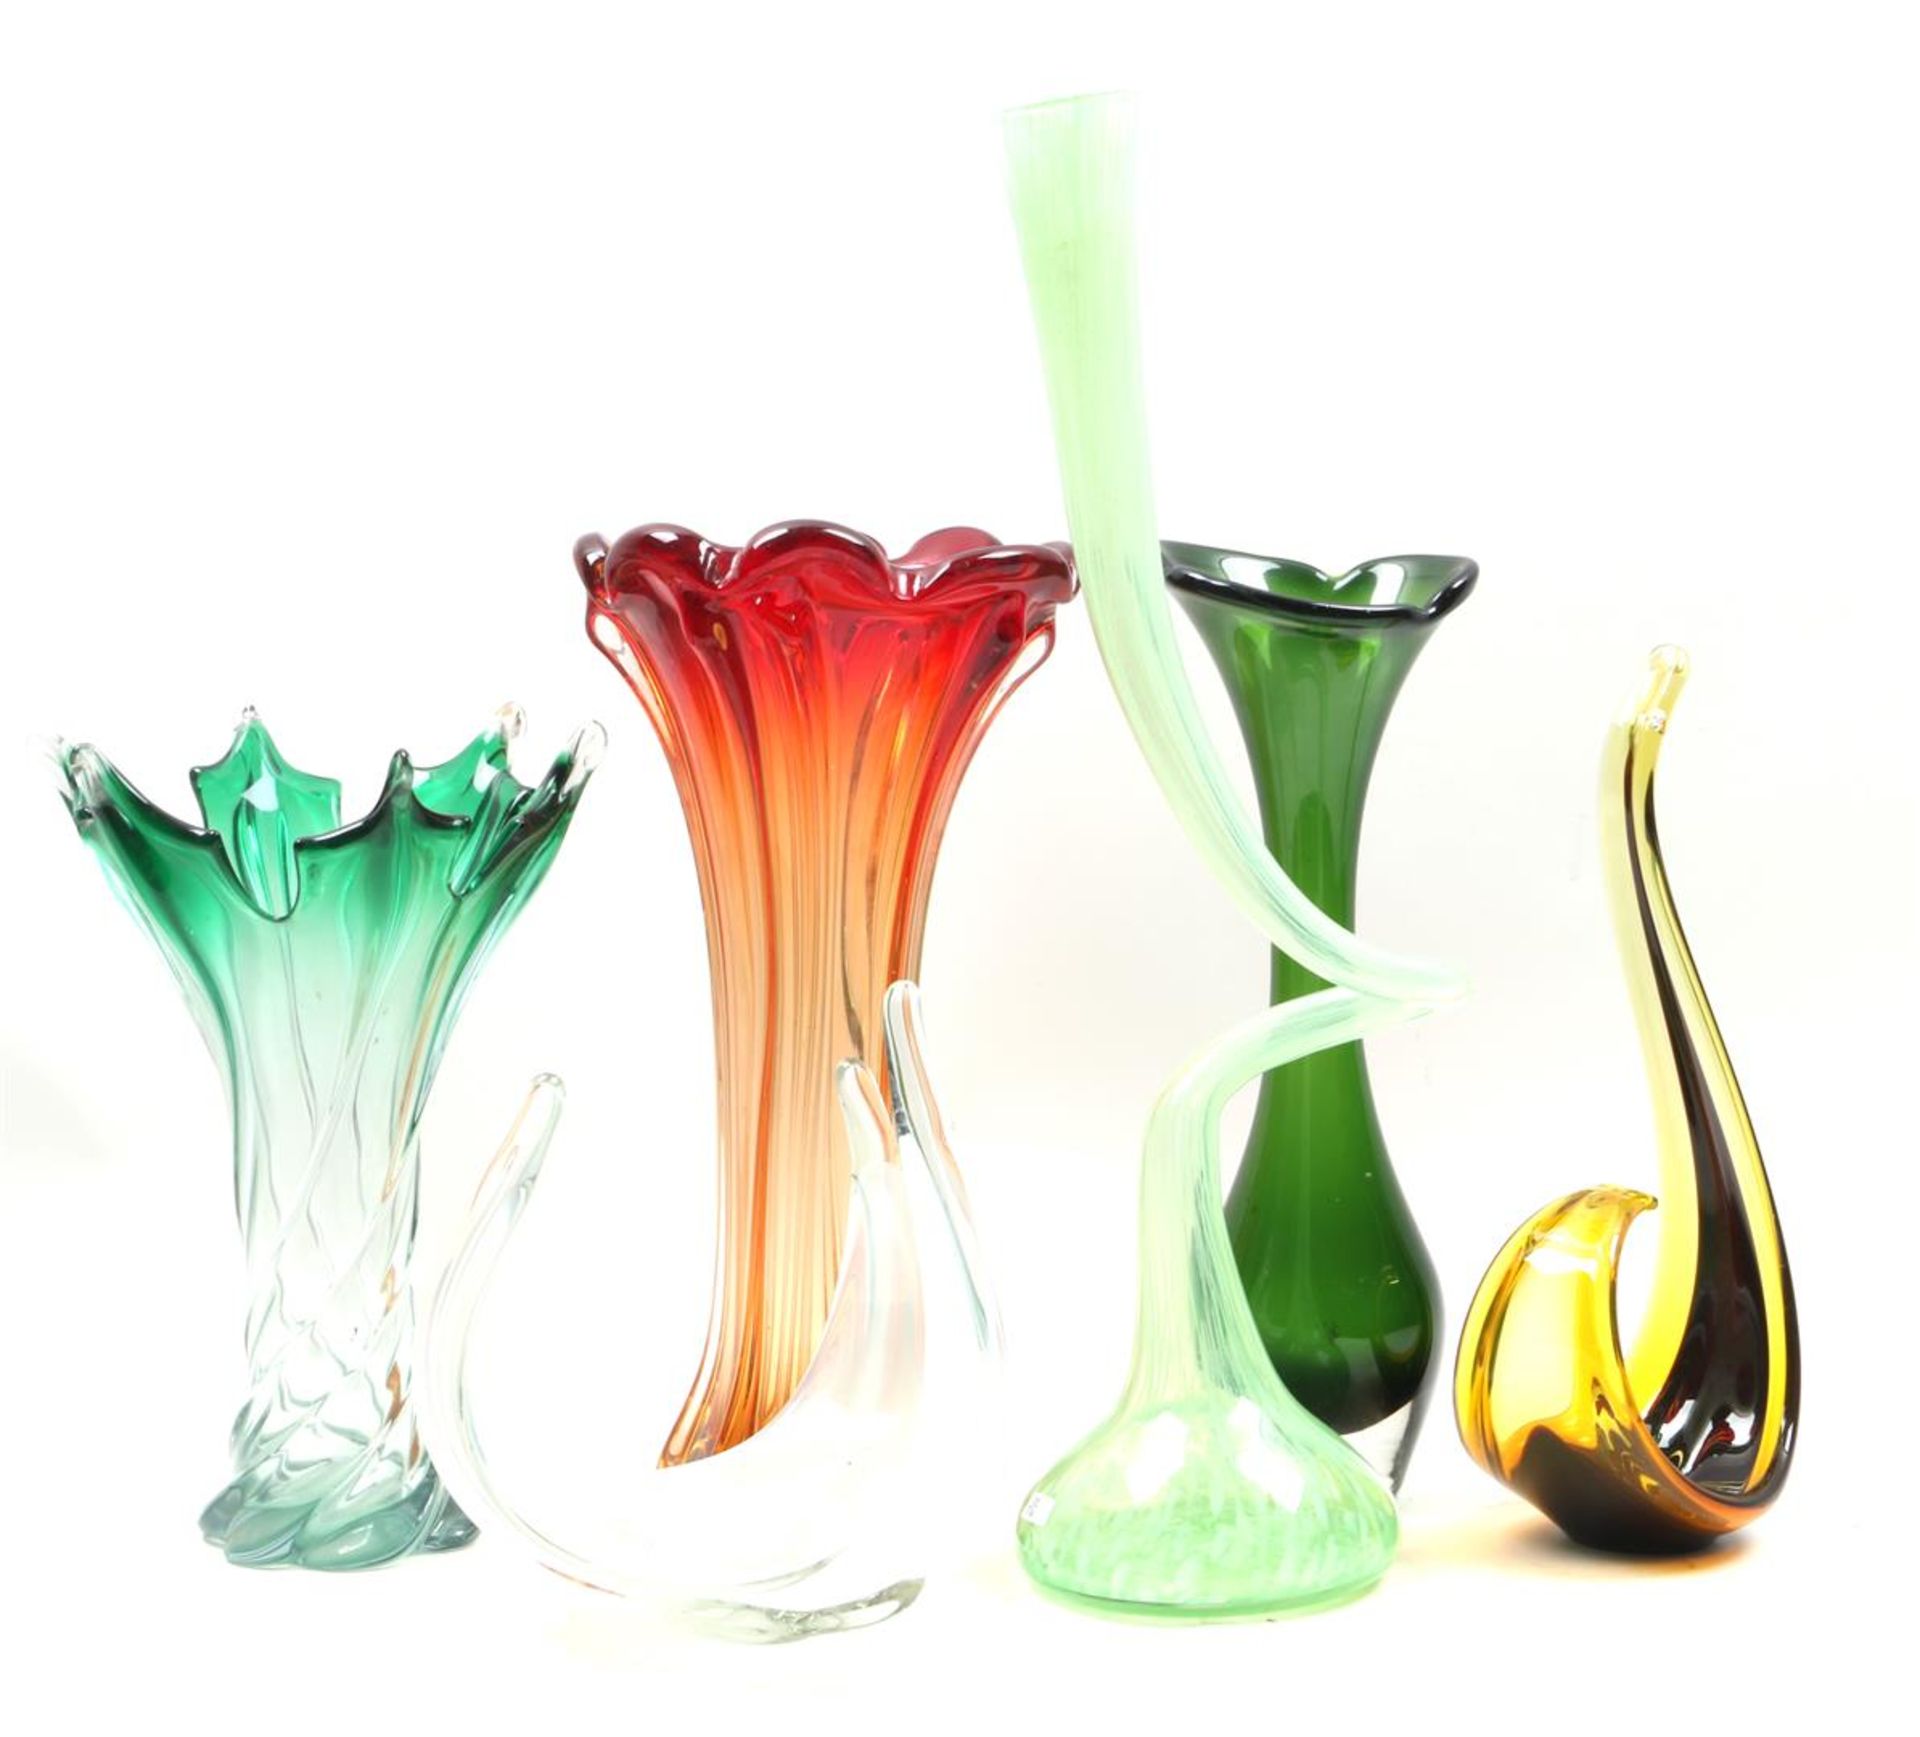 6 glass decorative objects, including a 61 cm high green, decorative vase